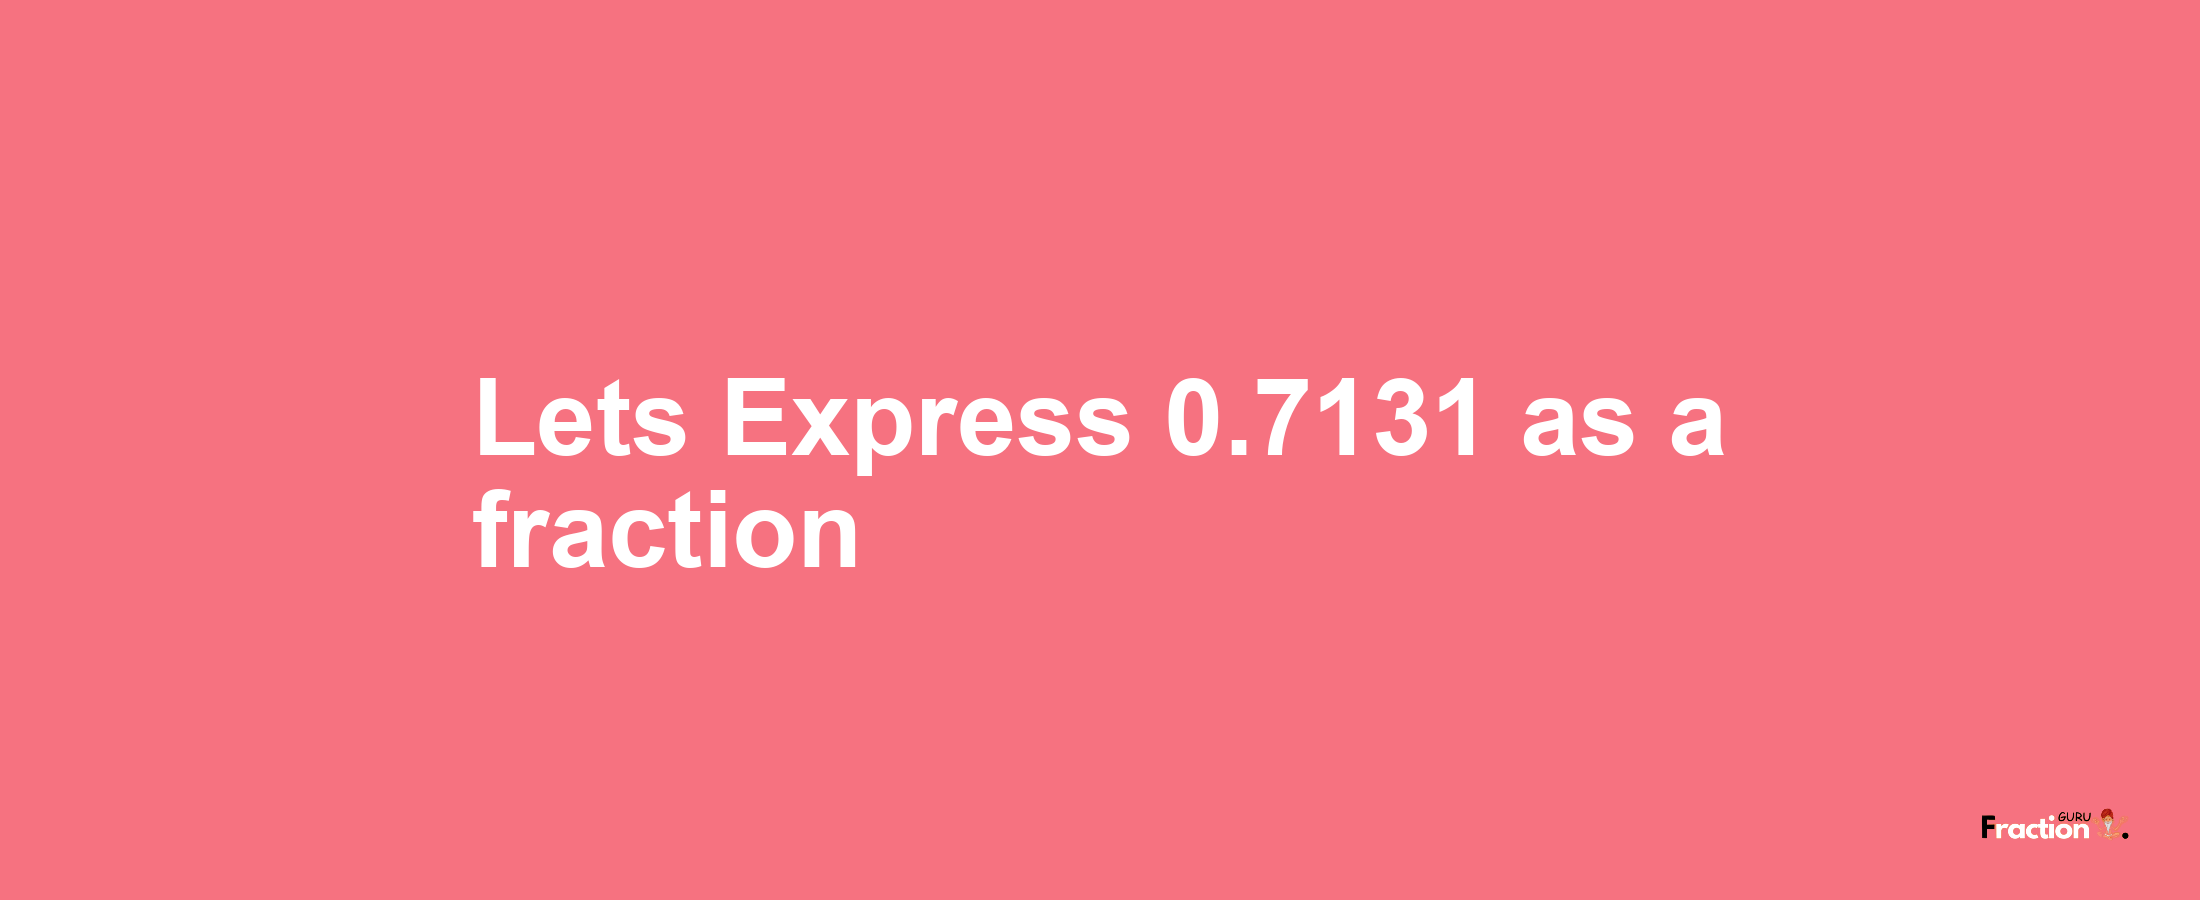 Lets Express 0.7131 as afraction